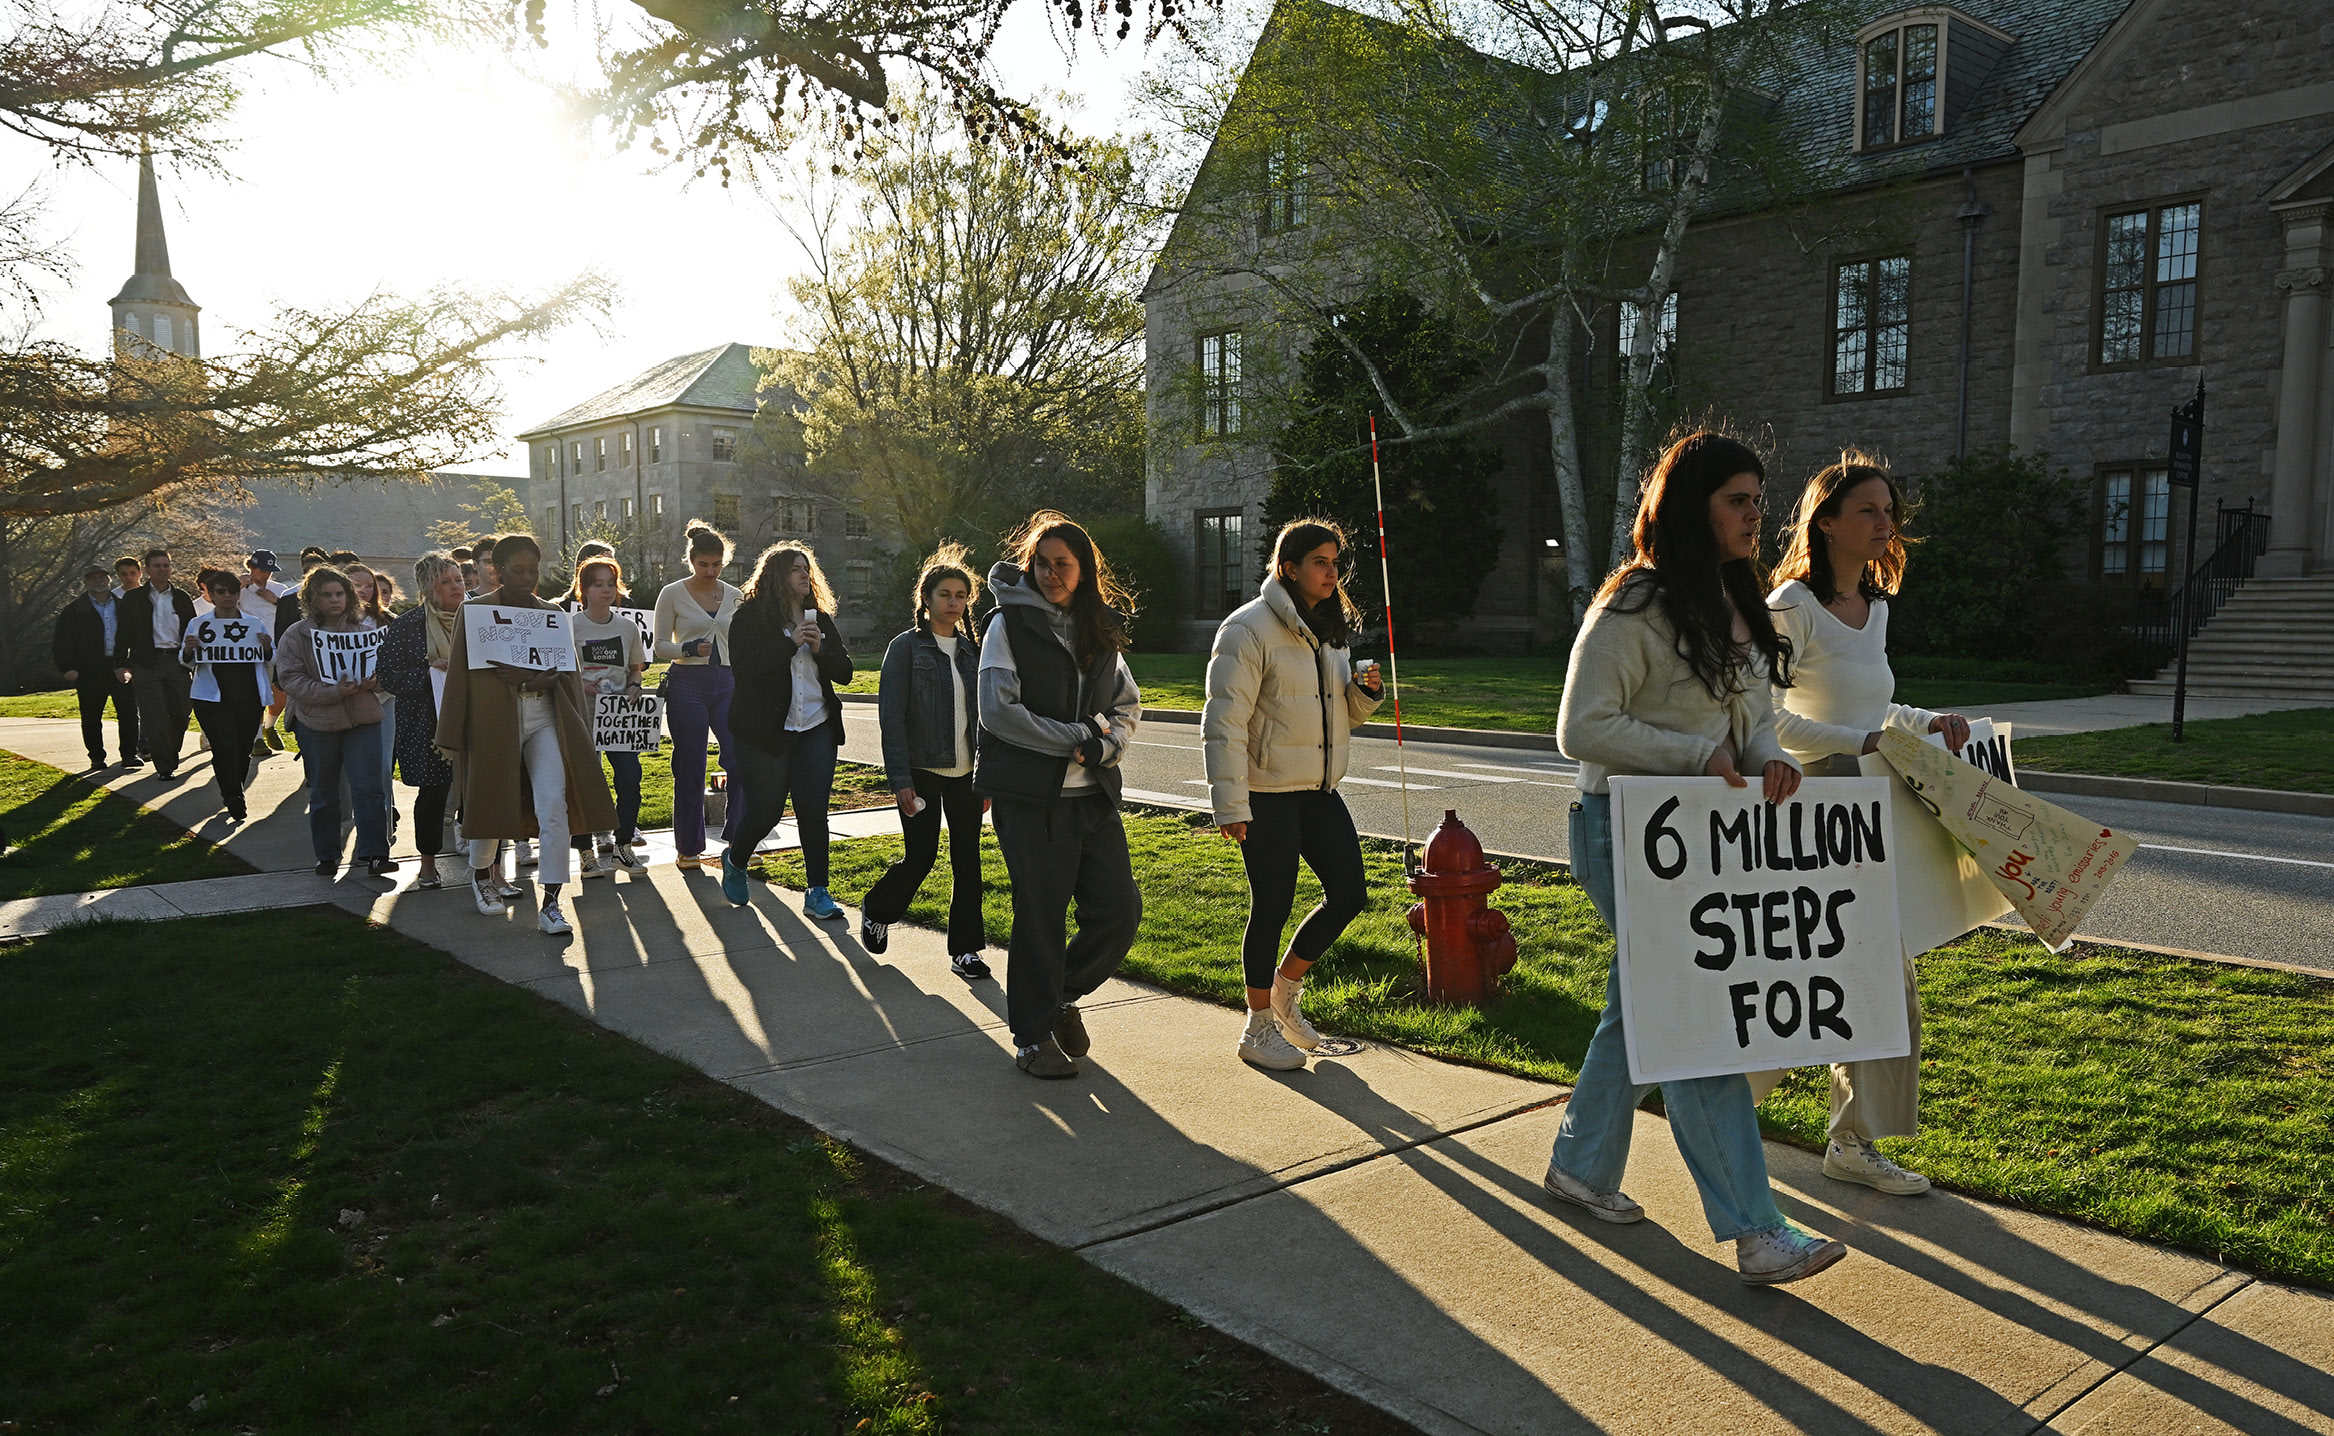 Students silently marched along Chapel Way in remembrance of the Holocaust.